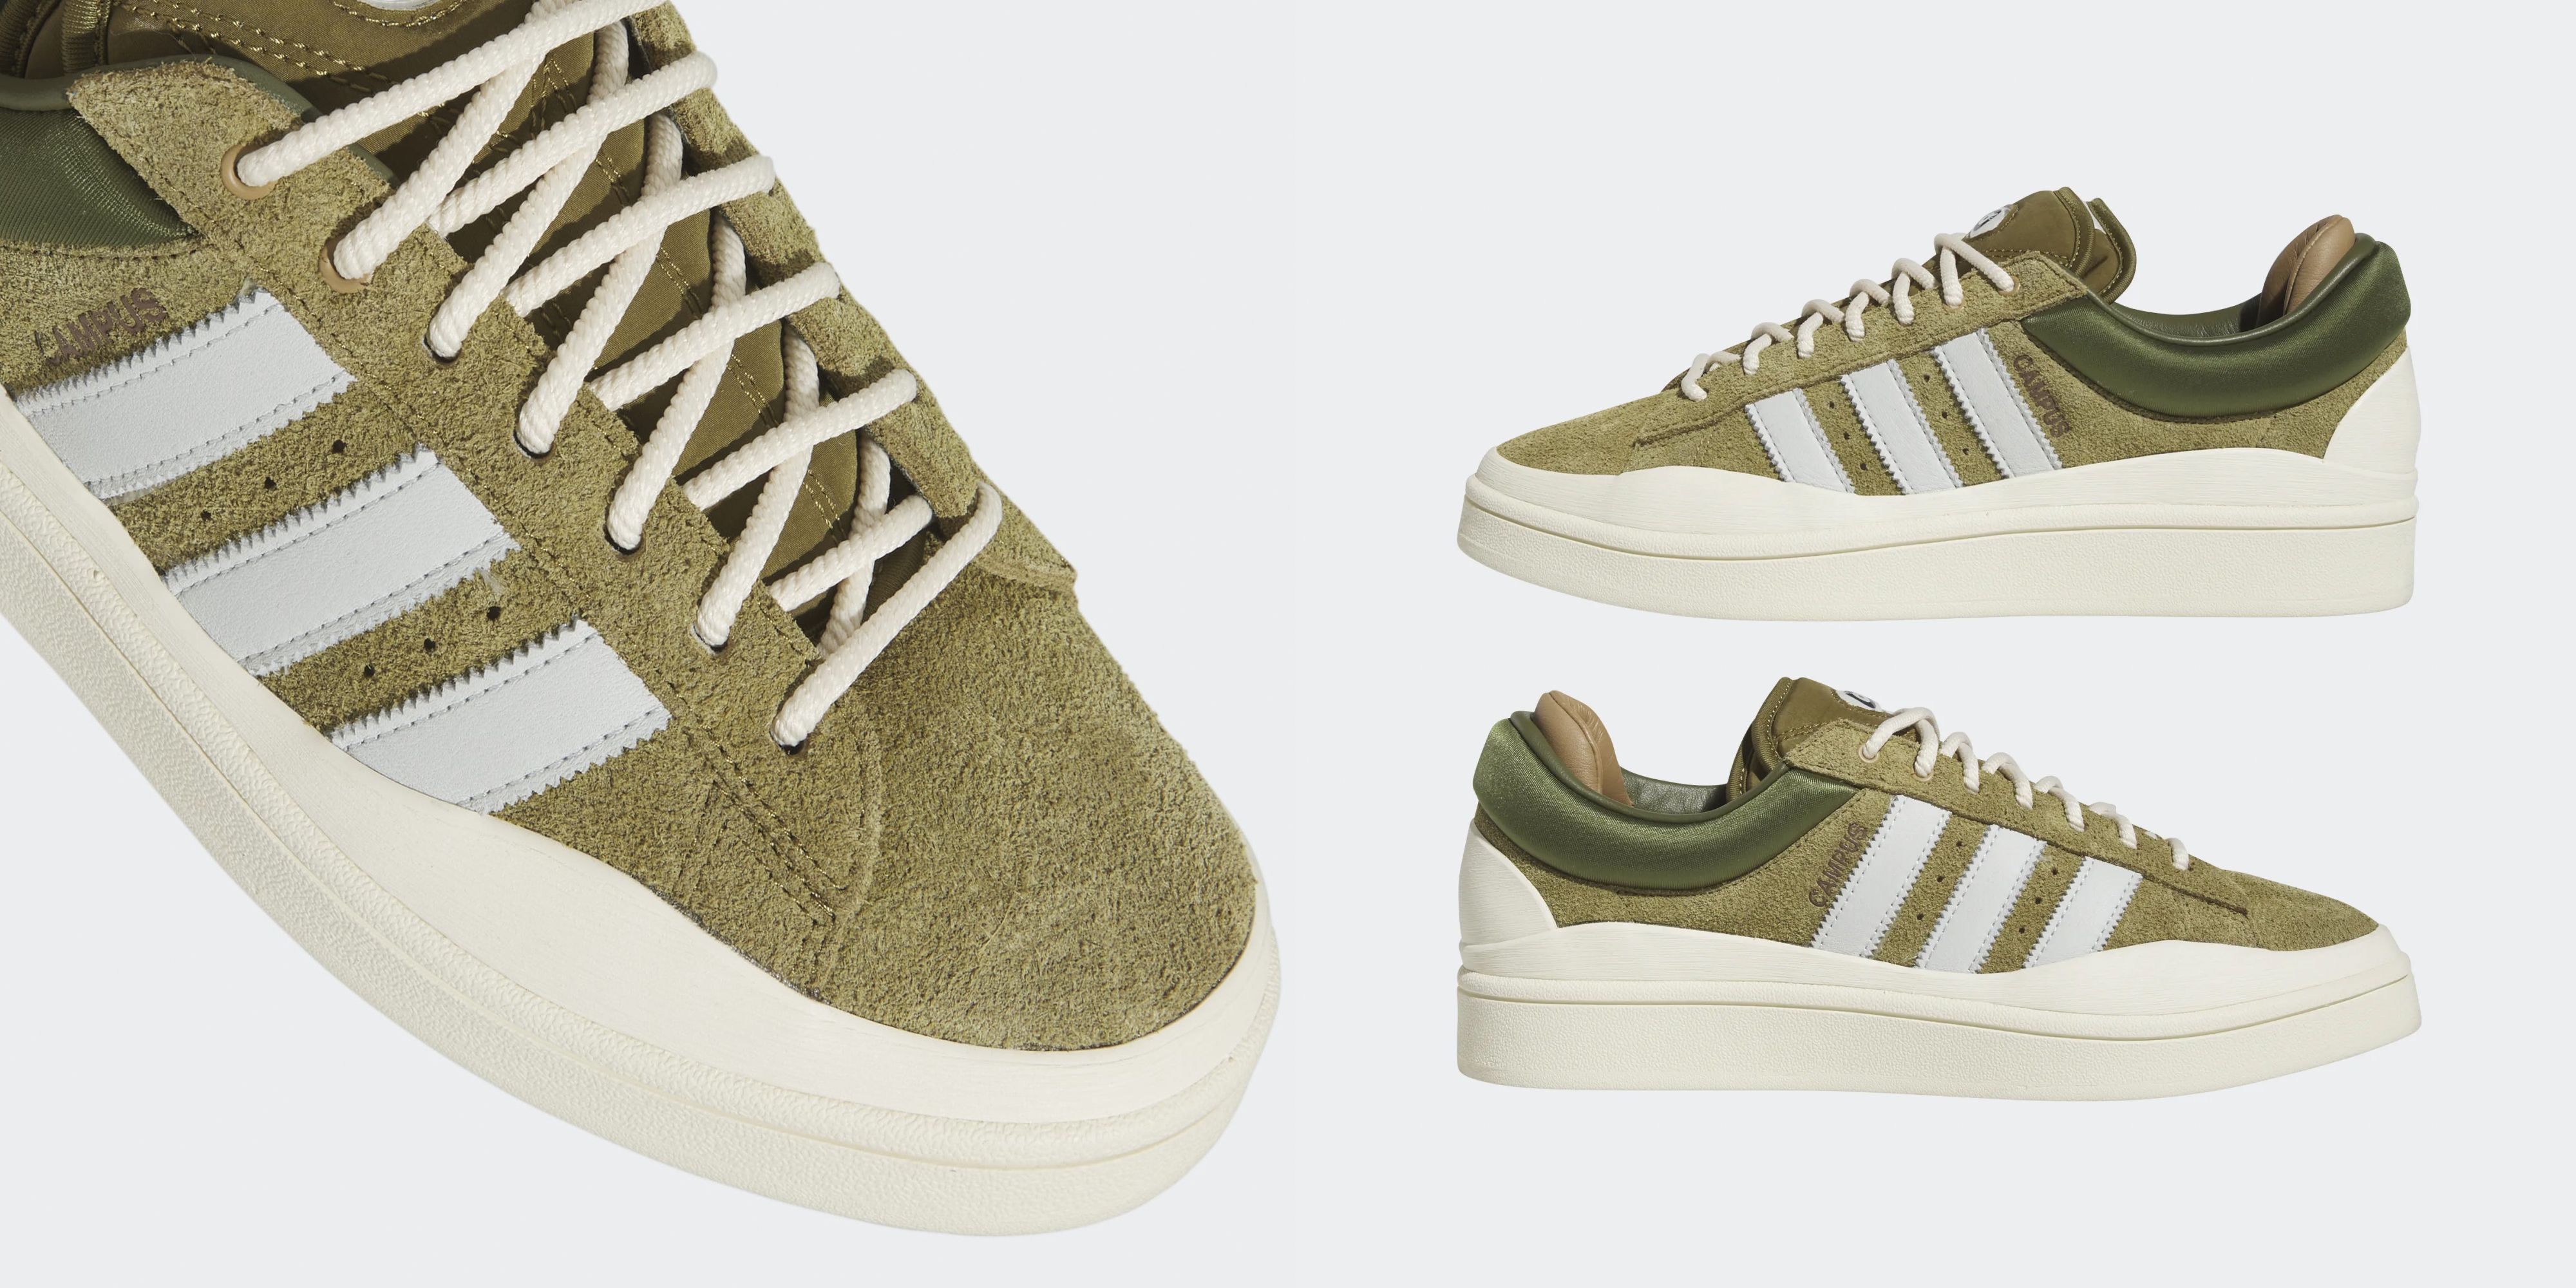 The Bad Bunny x Adidas Campus Light 'Wild Moss' Drops This Friday